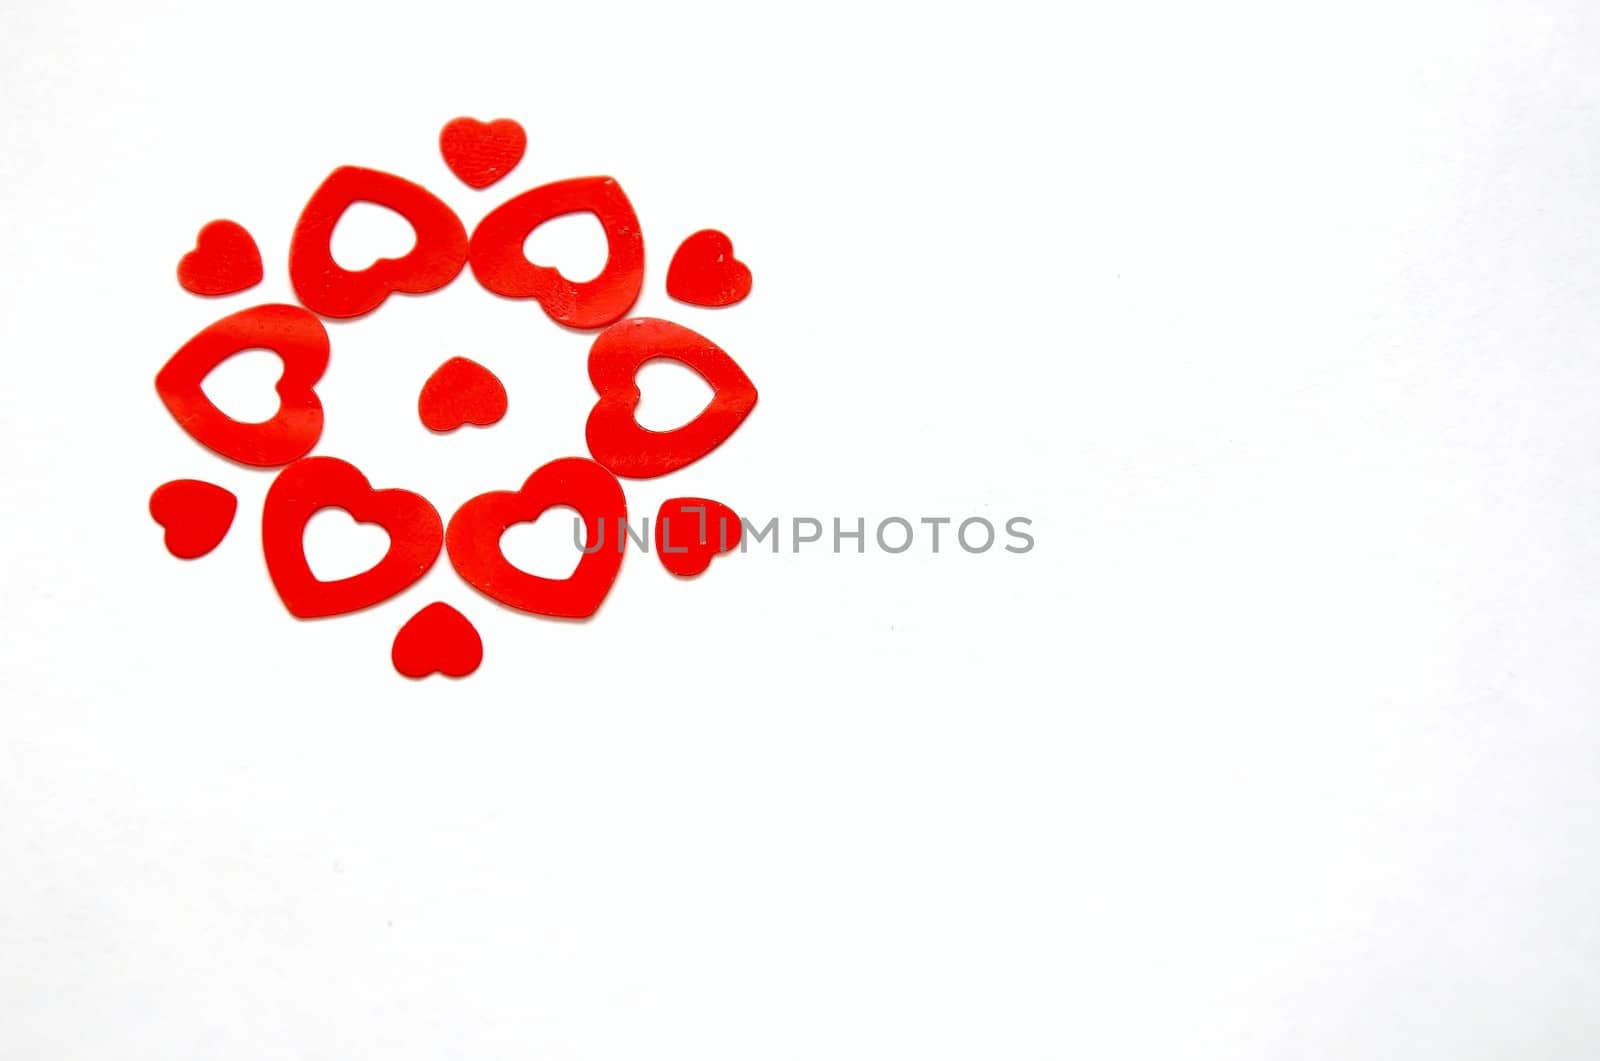 flower created with red heart shaped confetti